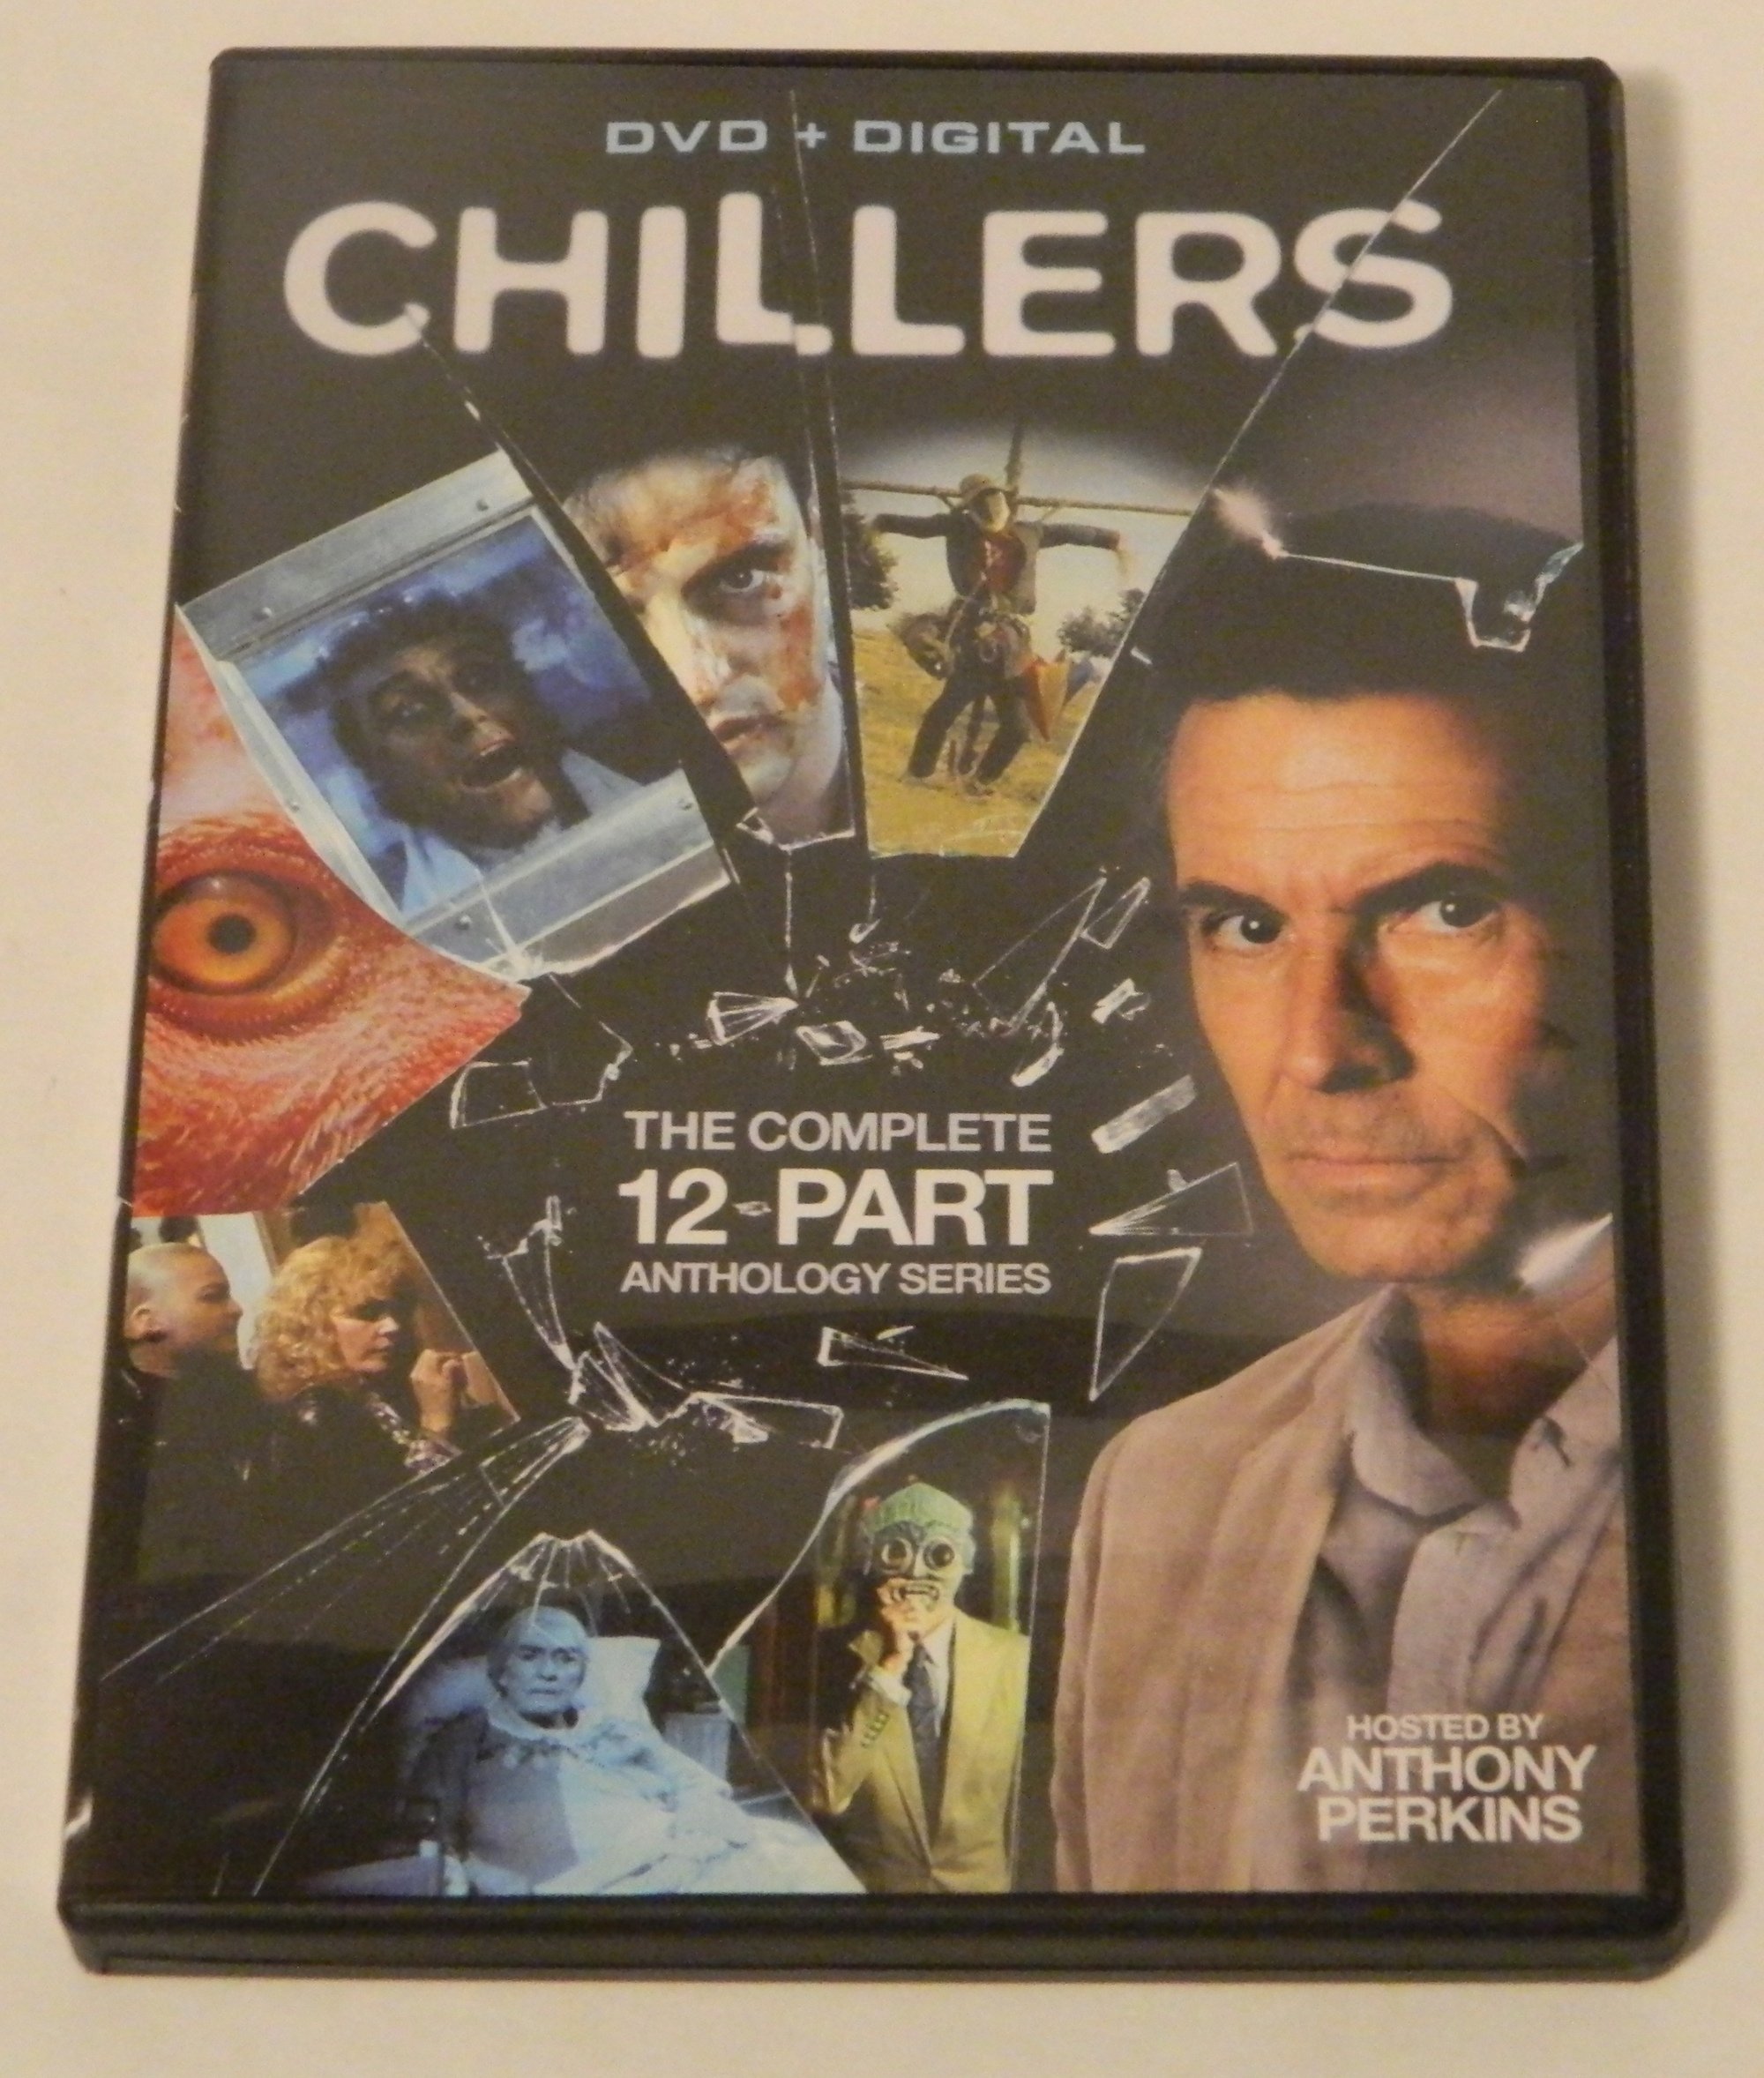 Chillers The Complete 12 Part Anthology Series DVD